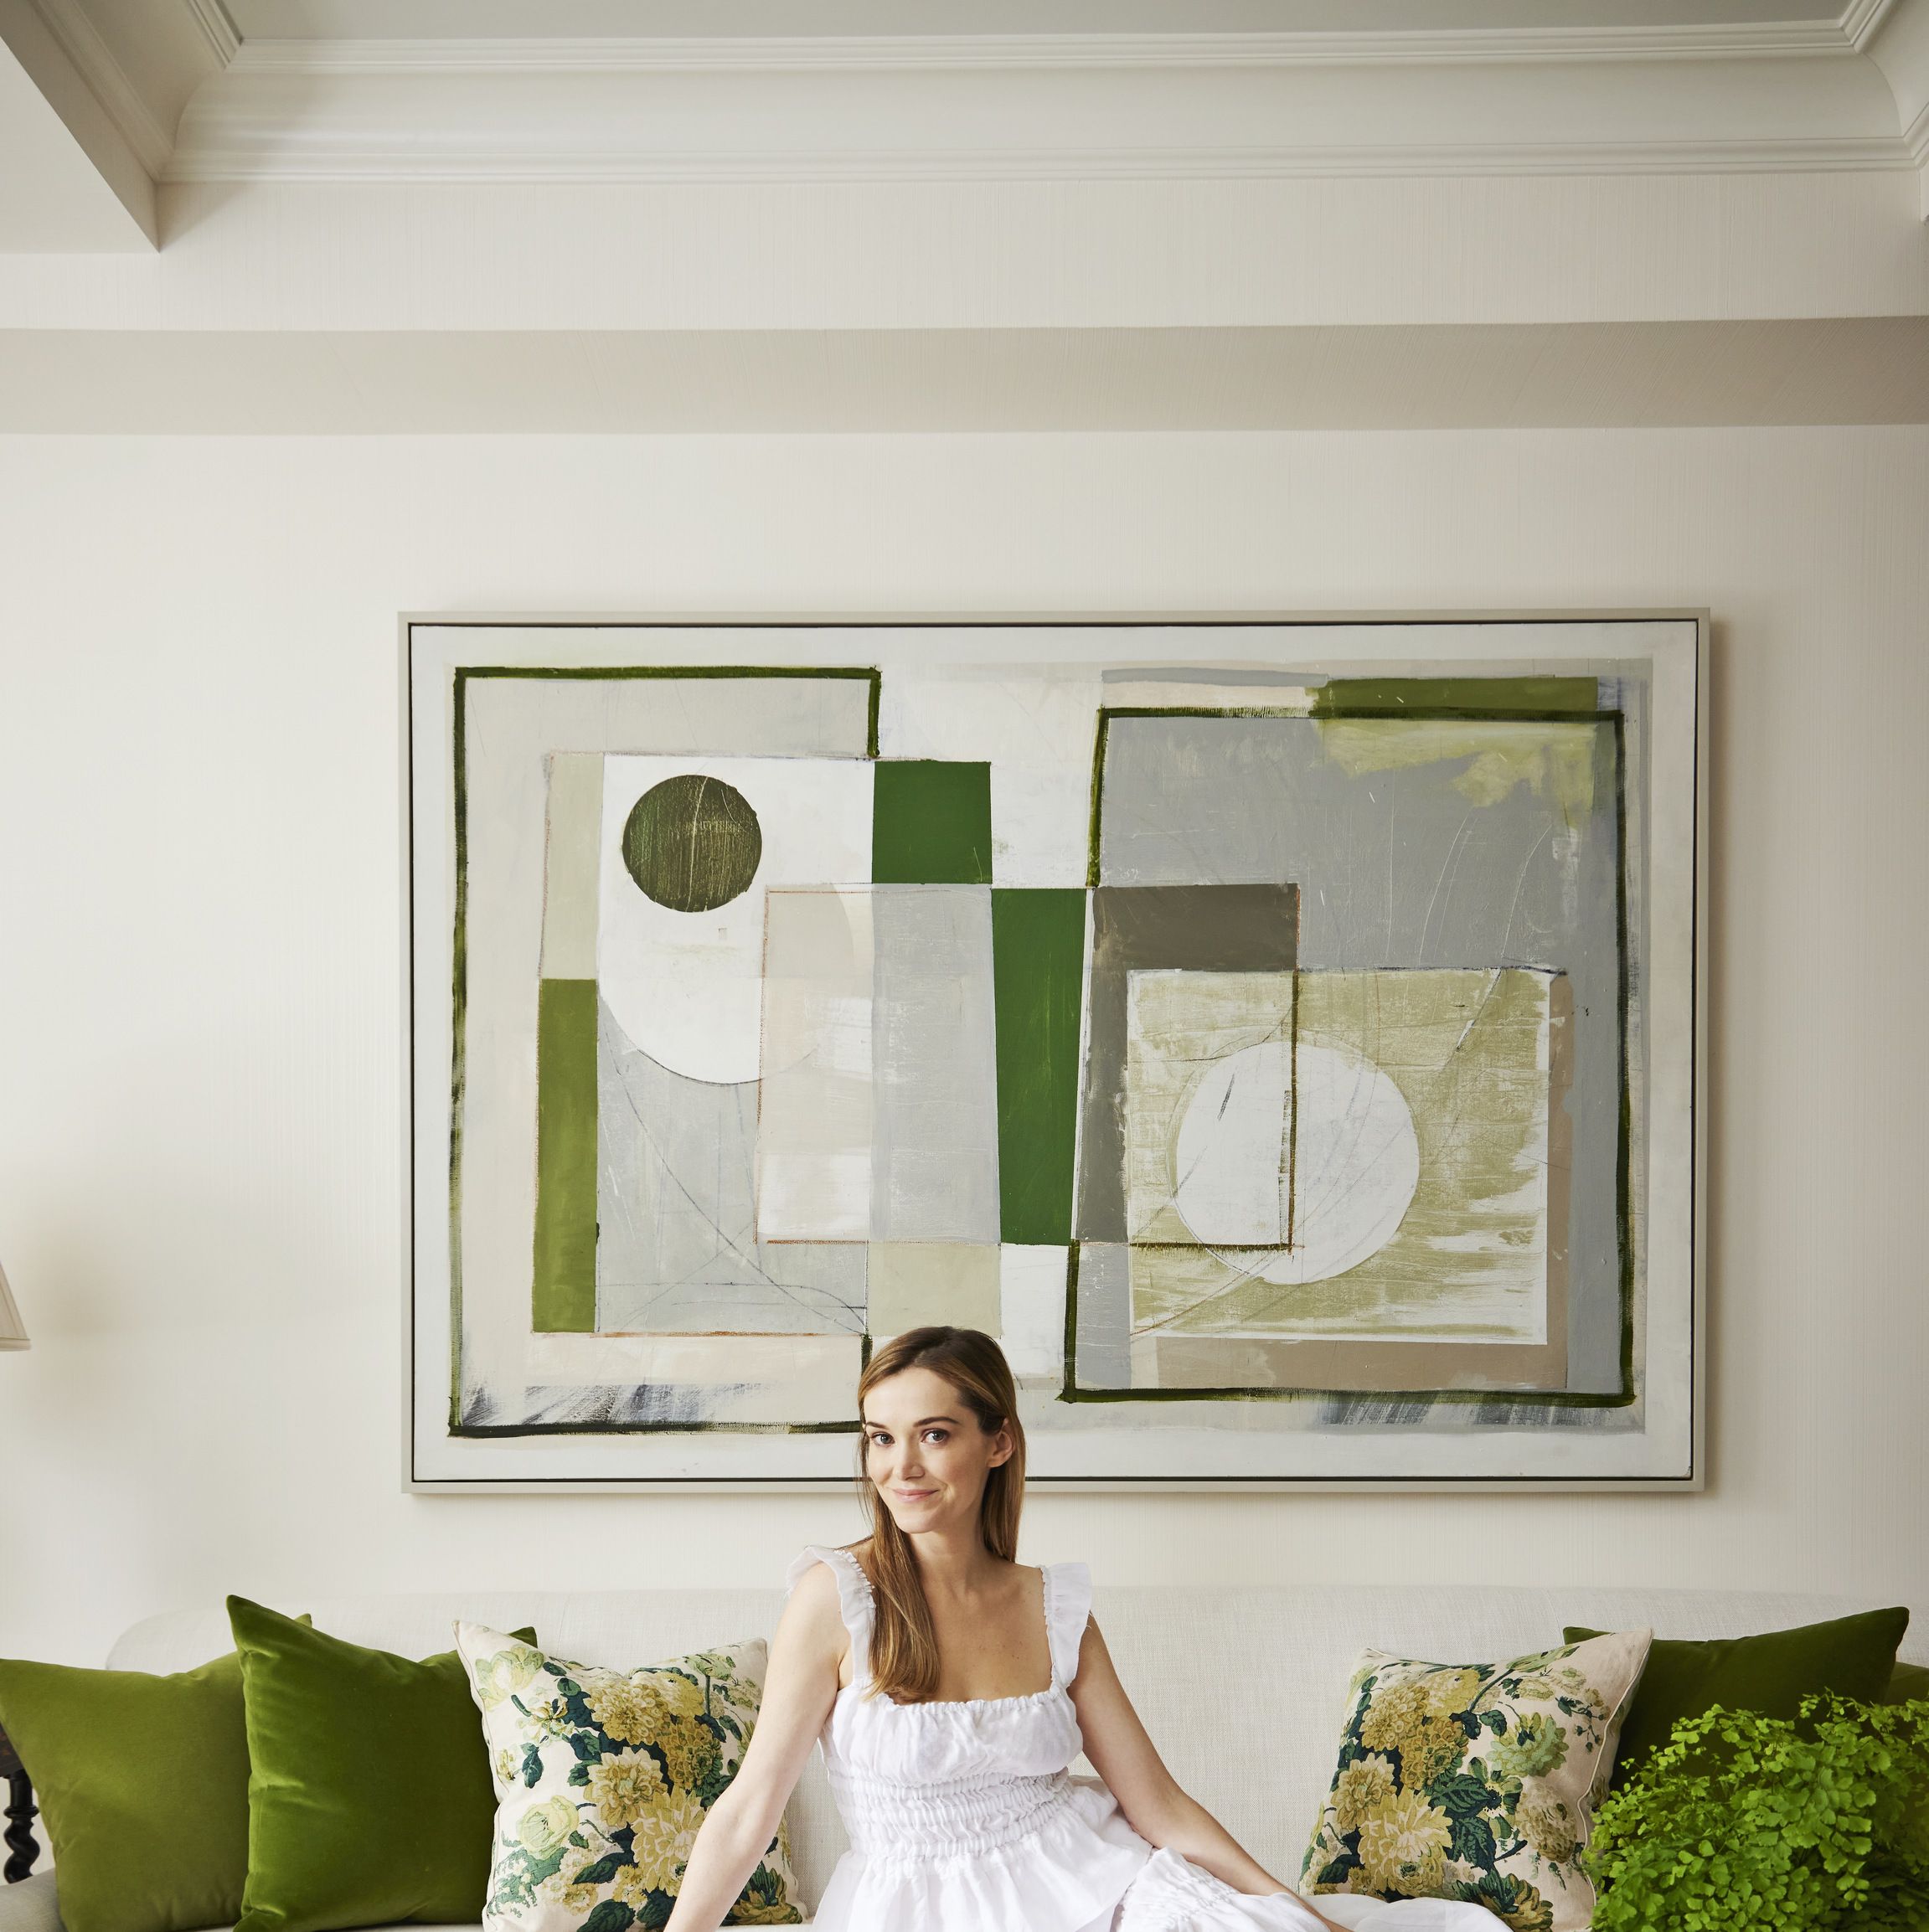 Cece Barfield Thompson's Gramercy Park Apartment Is Alive in Verdant Color and Nature-Inspired Art